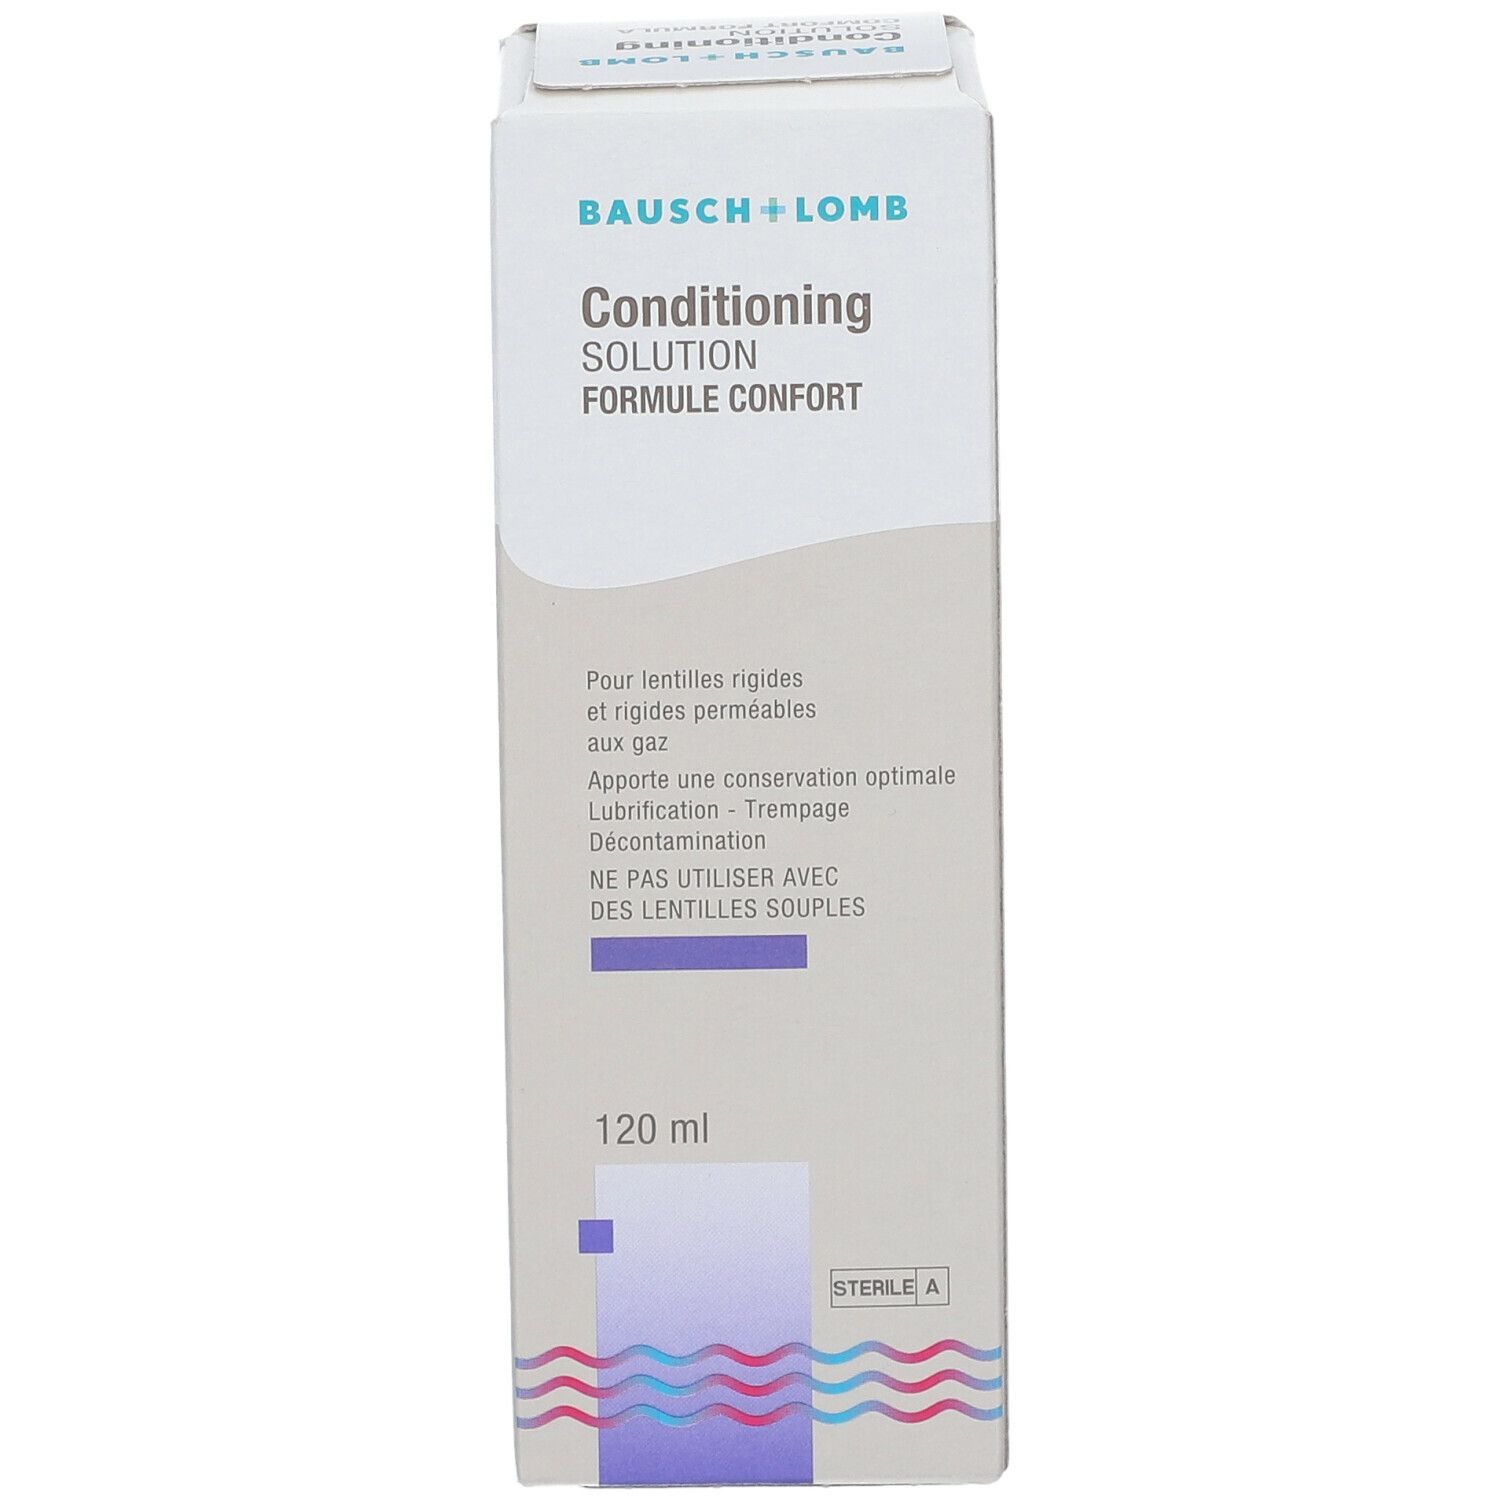 Bausch & Lomb Conditioning Solution